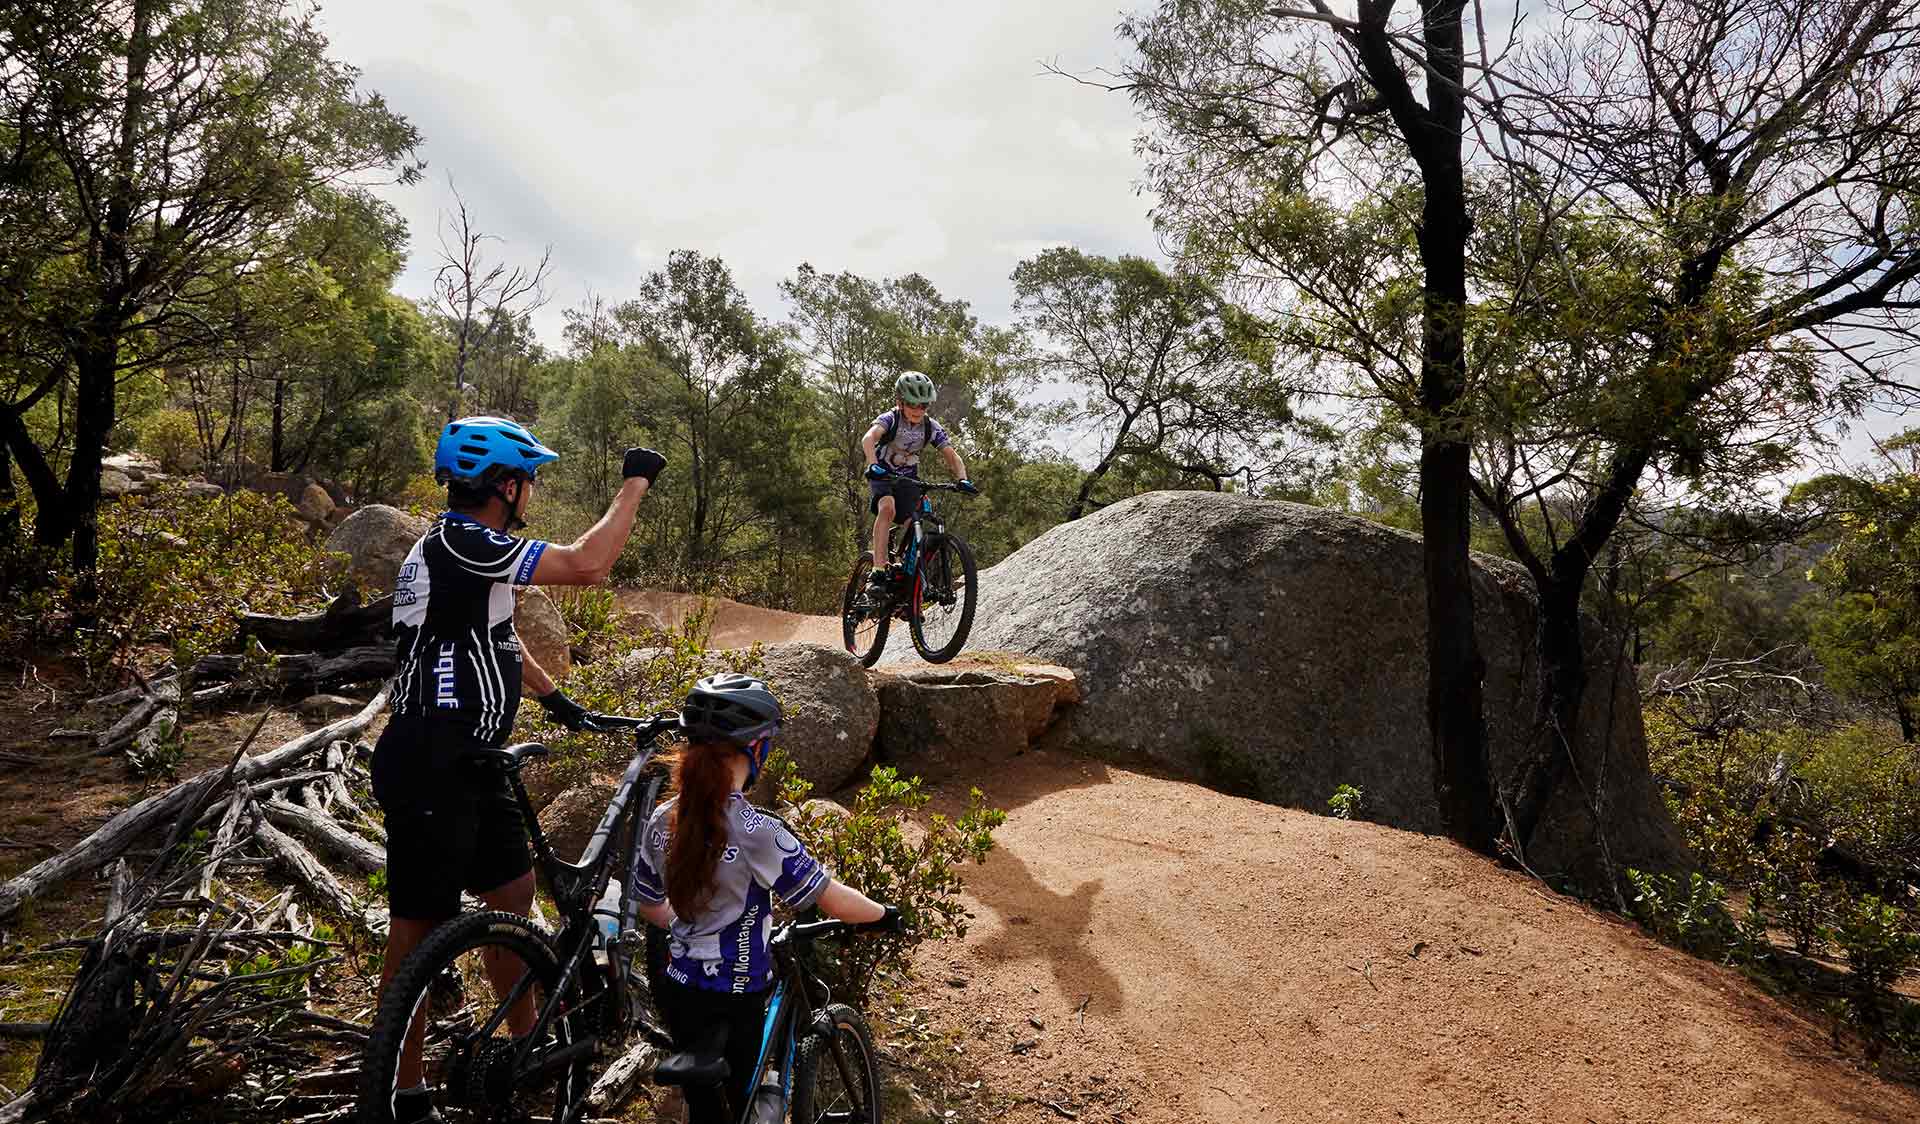 A young mountain biker attempts a drop while cheered on by his father and older sister at the You Yangs Regional Park.